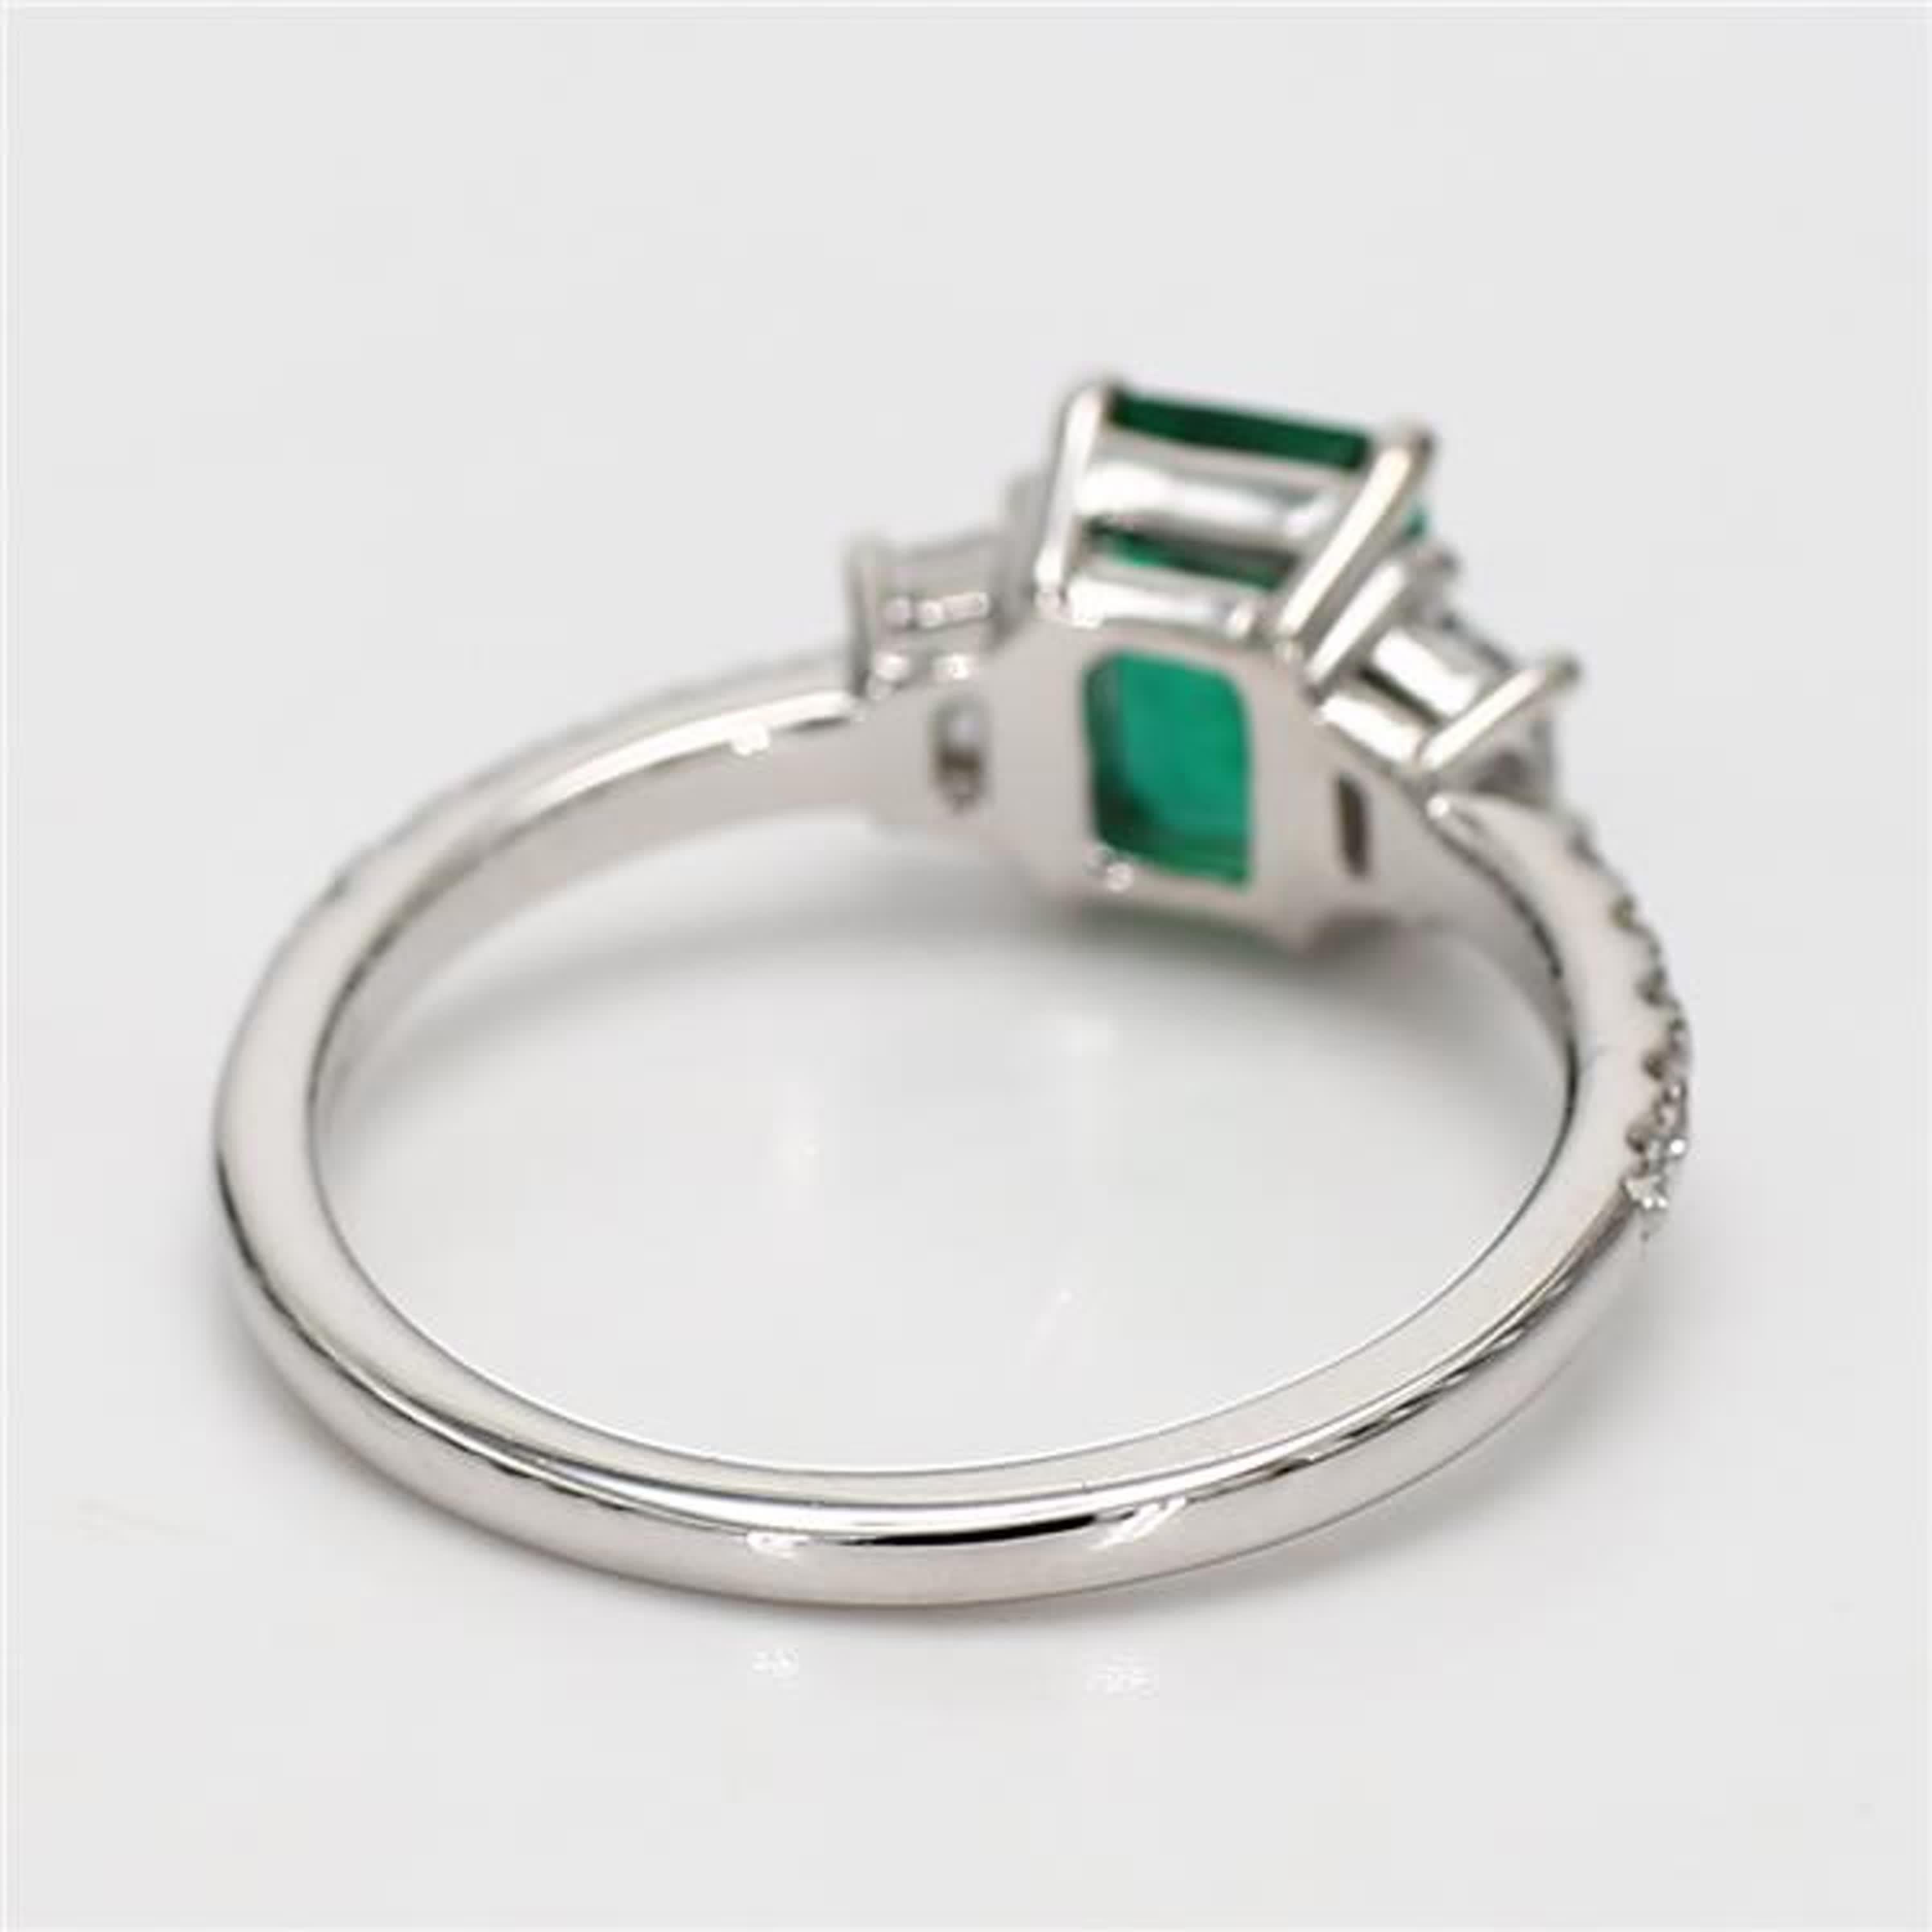 Women's Natural Emerald Cut Emerald and White Diamond 1.45 Carat TW Gold Cocktail Ring